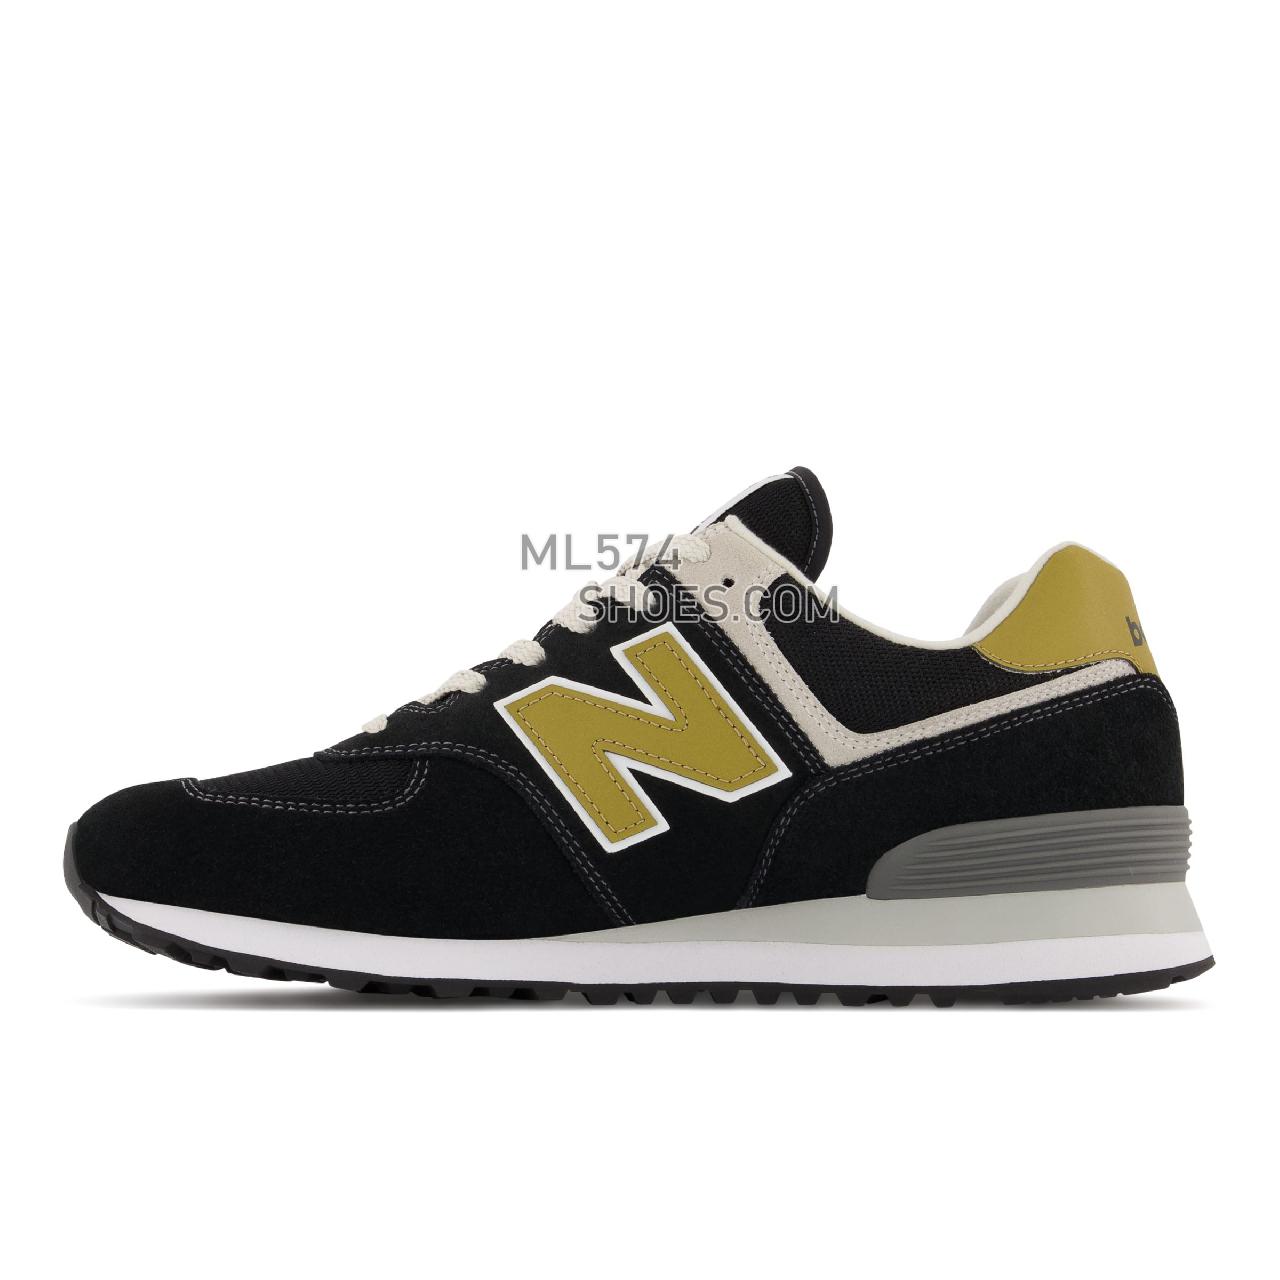 New Balance 574v2 - Men's Classic Sneakers - Black with Tan - ML574EO2